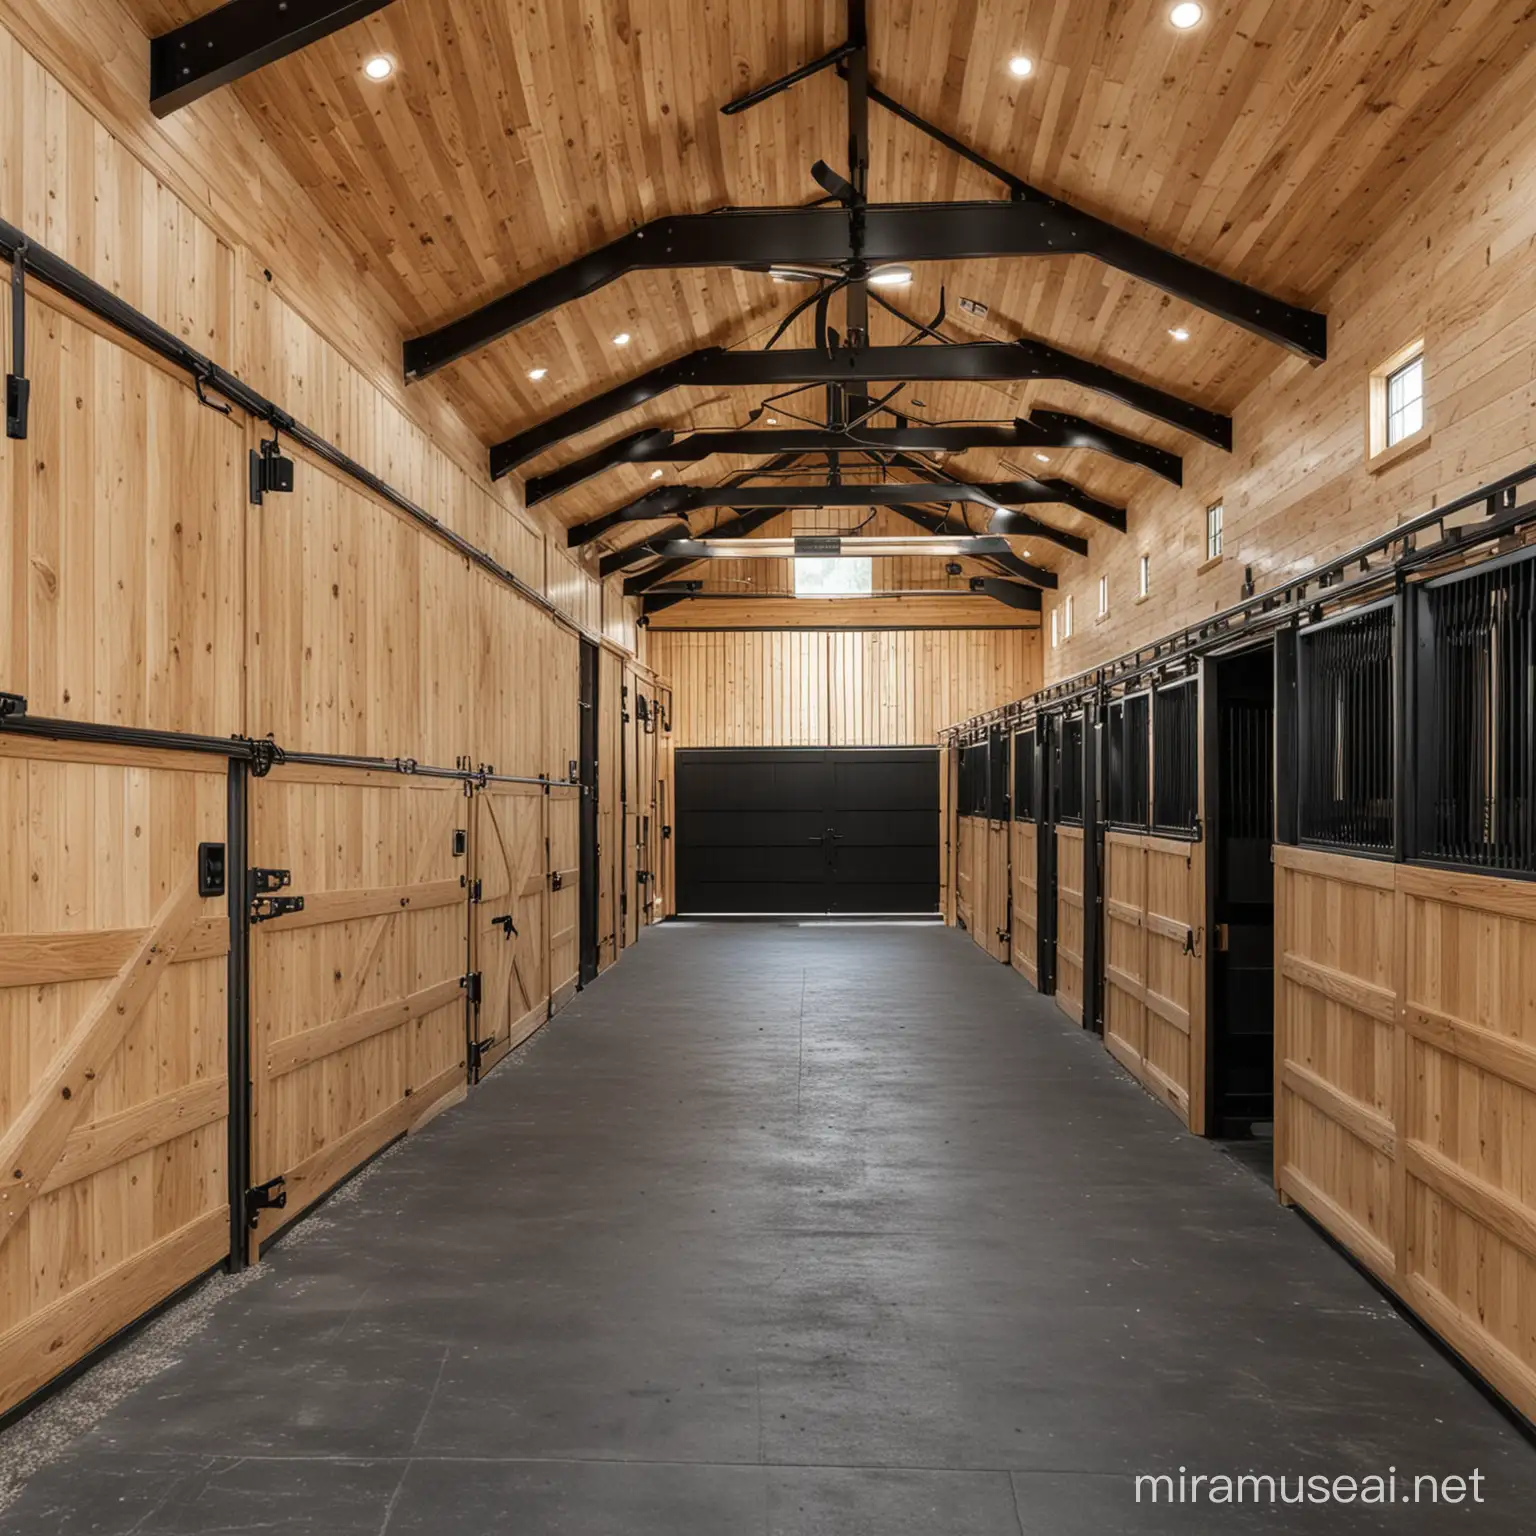 horse barn. These horses benefit from stables that encourage social interaction with other horses. Stables may be larger and may include shared turnout areas or paddocks where horses can interact and socialize with each other. luxury. oak wood. black hardware.